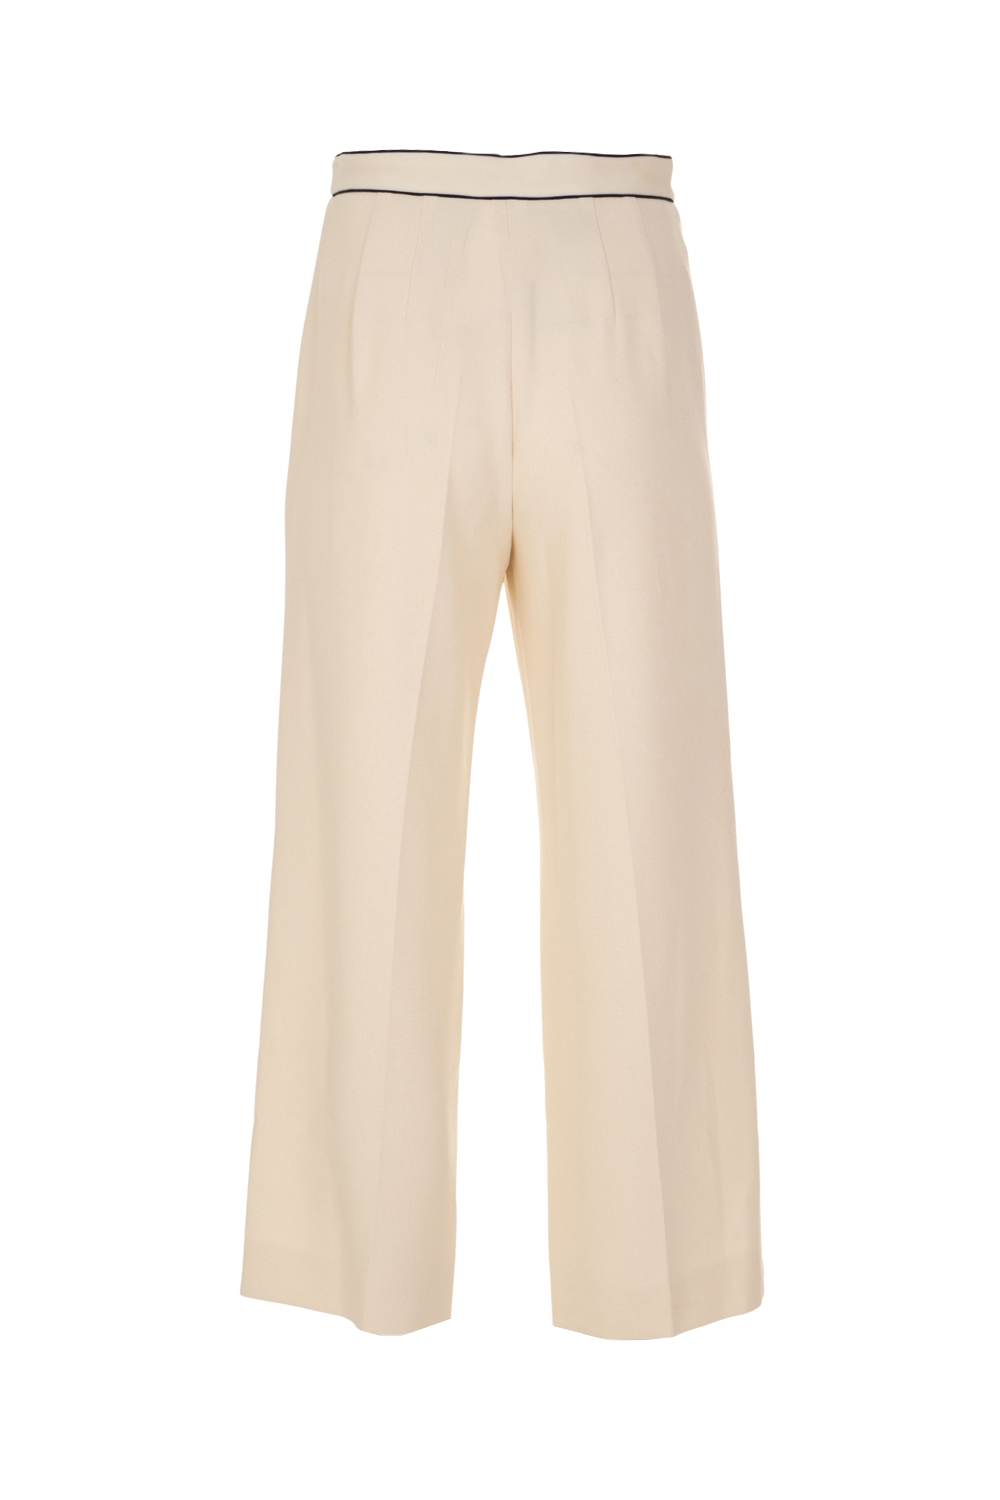 Cropped Nautical Style Soft Trousers with Piped Waist